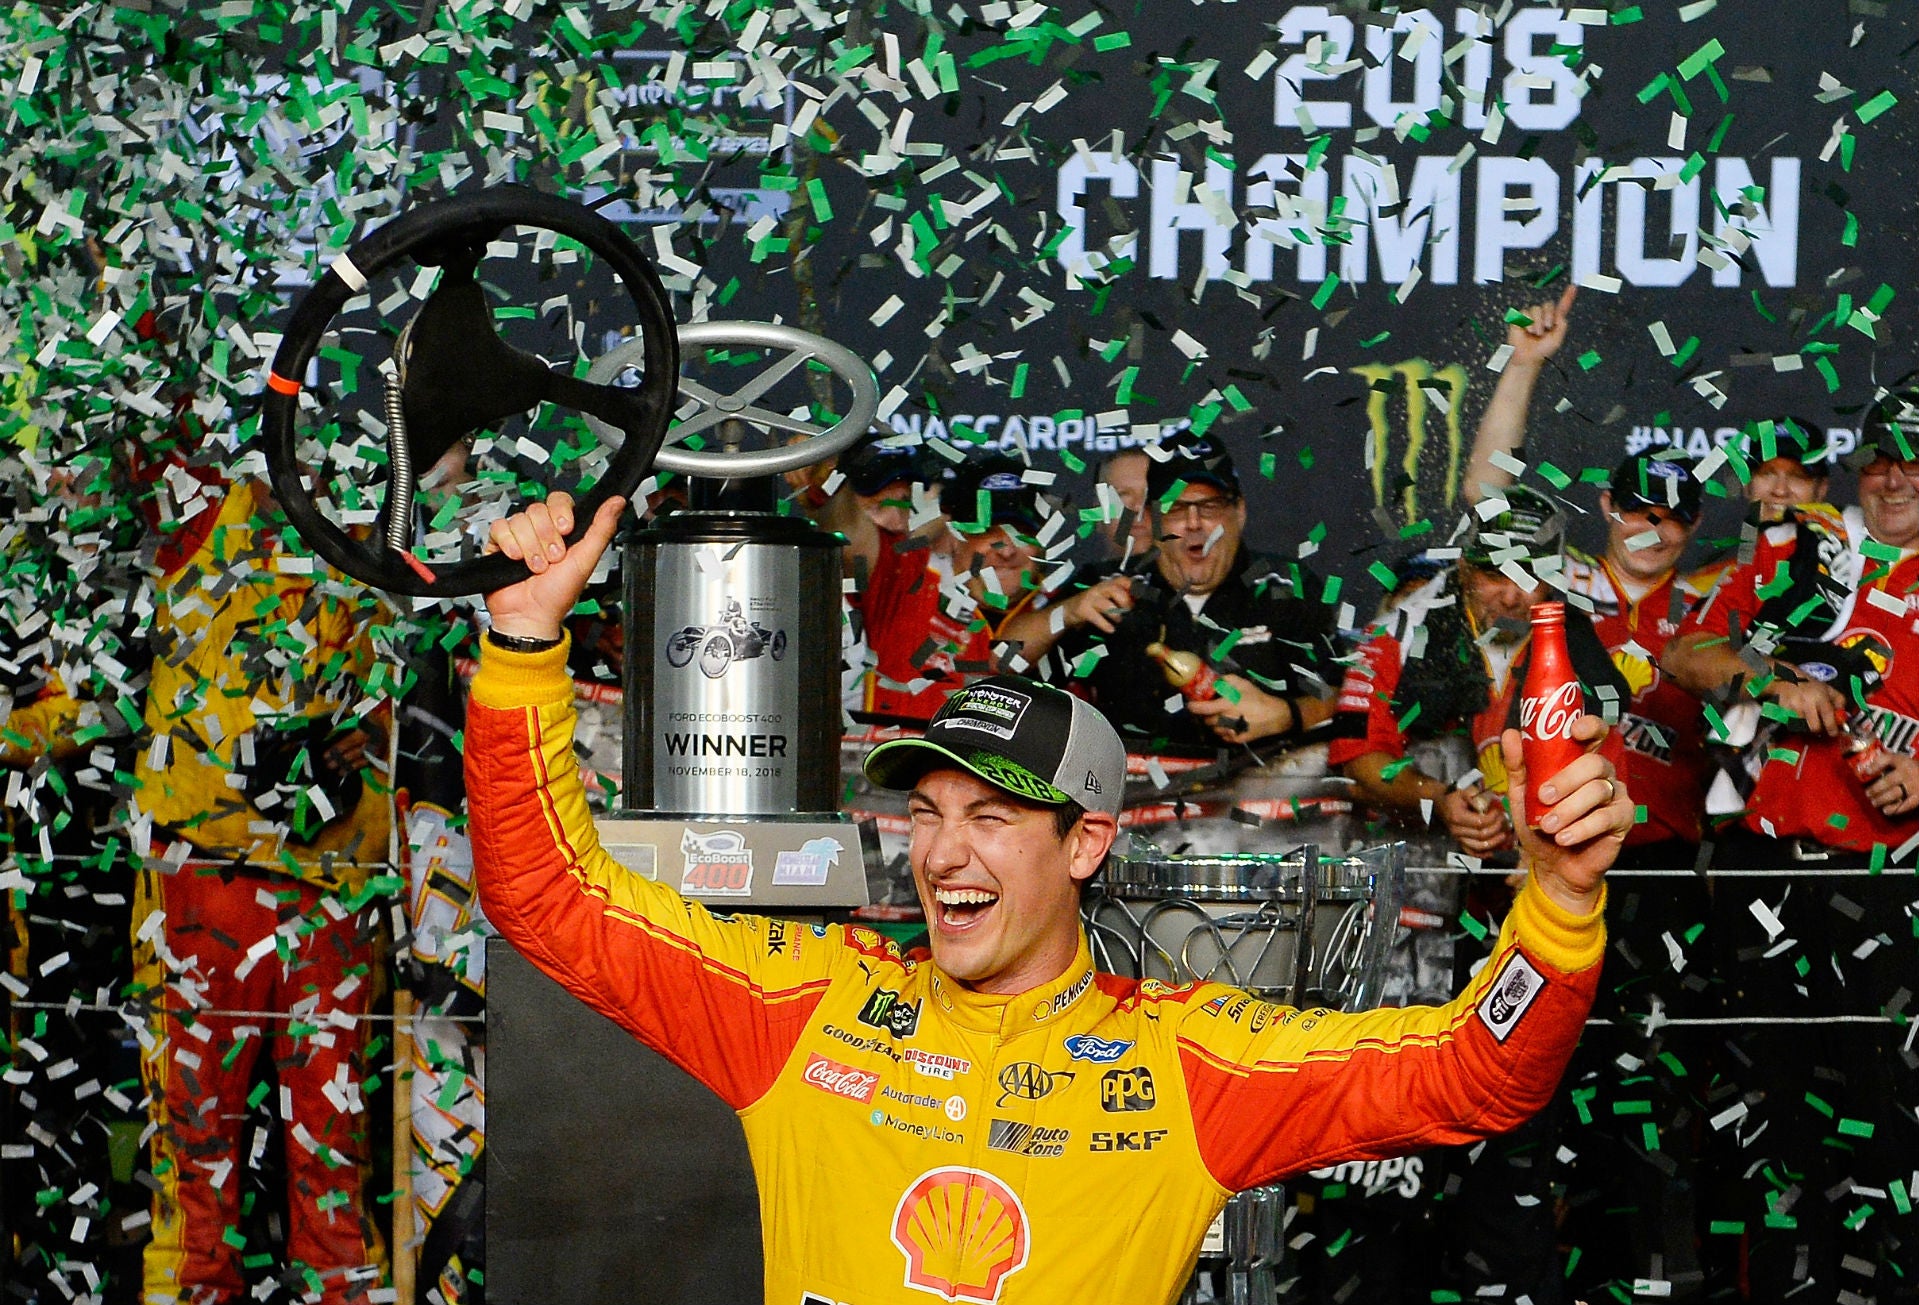 Joey Logano Wins First NASCAR Cup Series Championship at Homestead-Miami Speedway